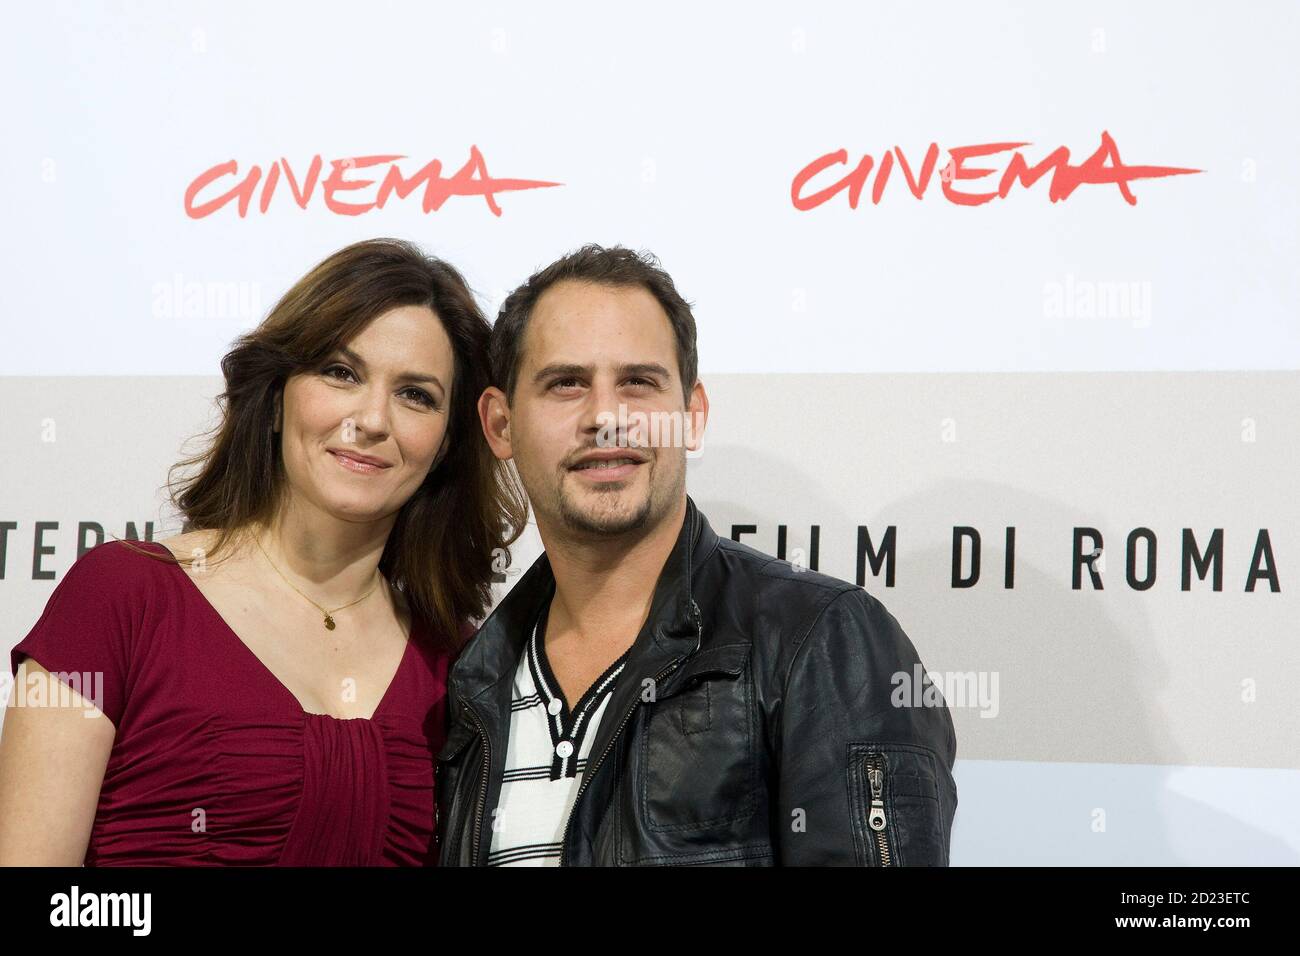 Actors Martina Gedeck and Moritz Bleibtreu pose during a photo call for their movie 'Der Baader Meinhof Complex' (The Baader Meinhof Complex) at the Rome Film Festival October 24, 2008.    REUTERS/Alessandro Bianchi   (ITALY) Stock Photo